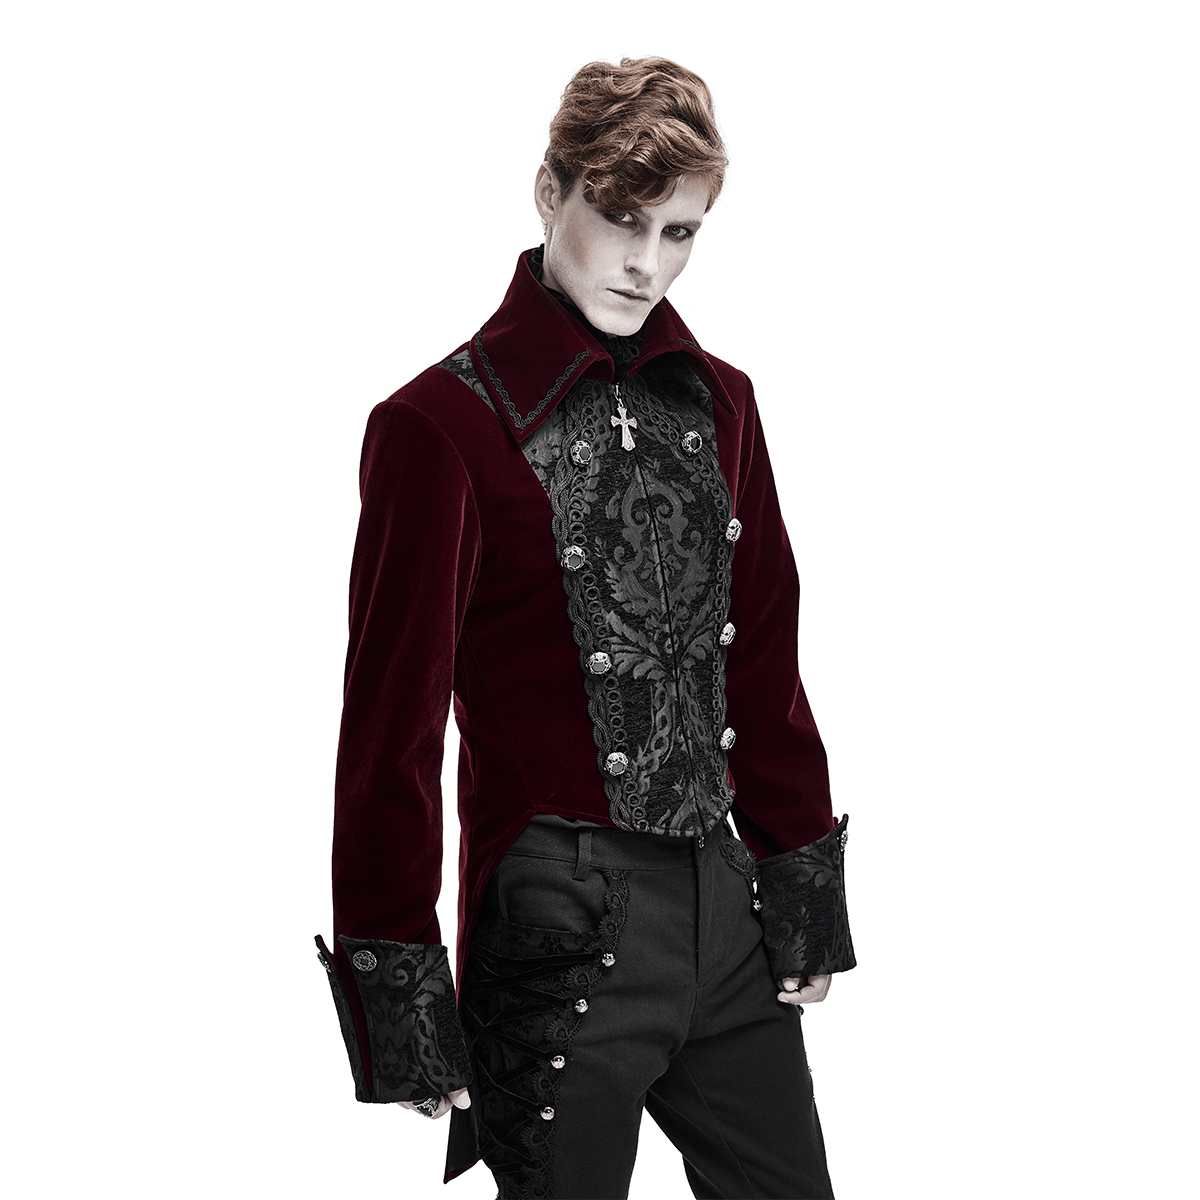 Gothic style Red Velvet Coat with Engraved Buttons / Men's Long Sleeves Coat / Alternative Fashion - HARD'N'HEAVY